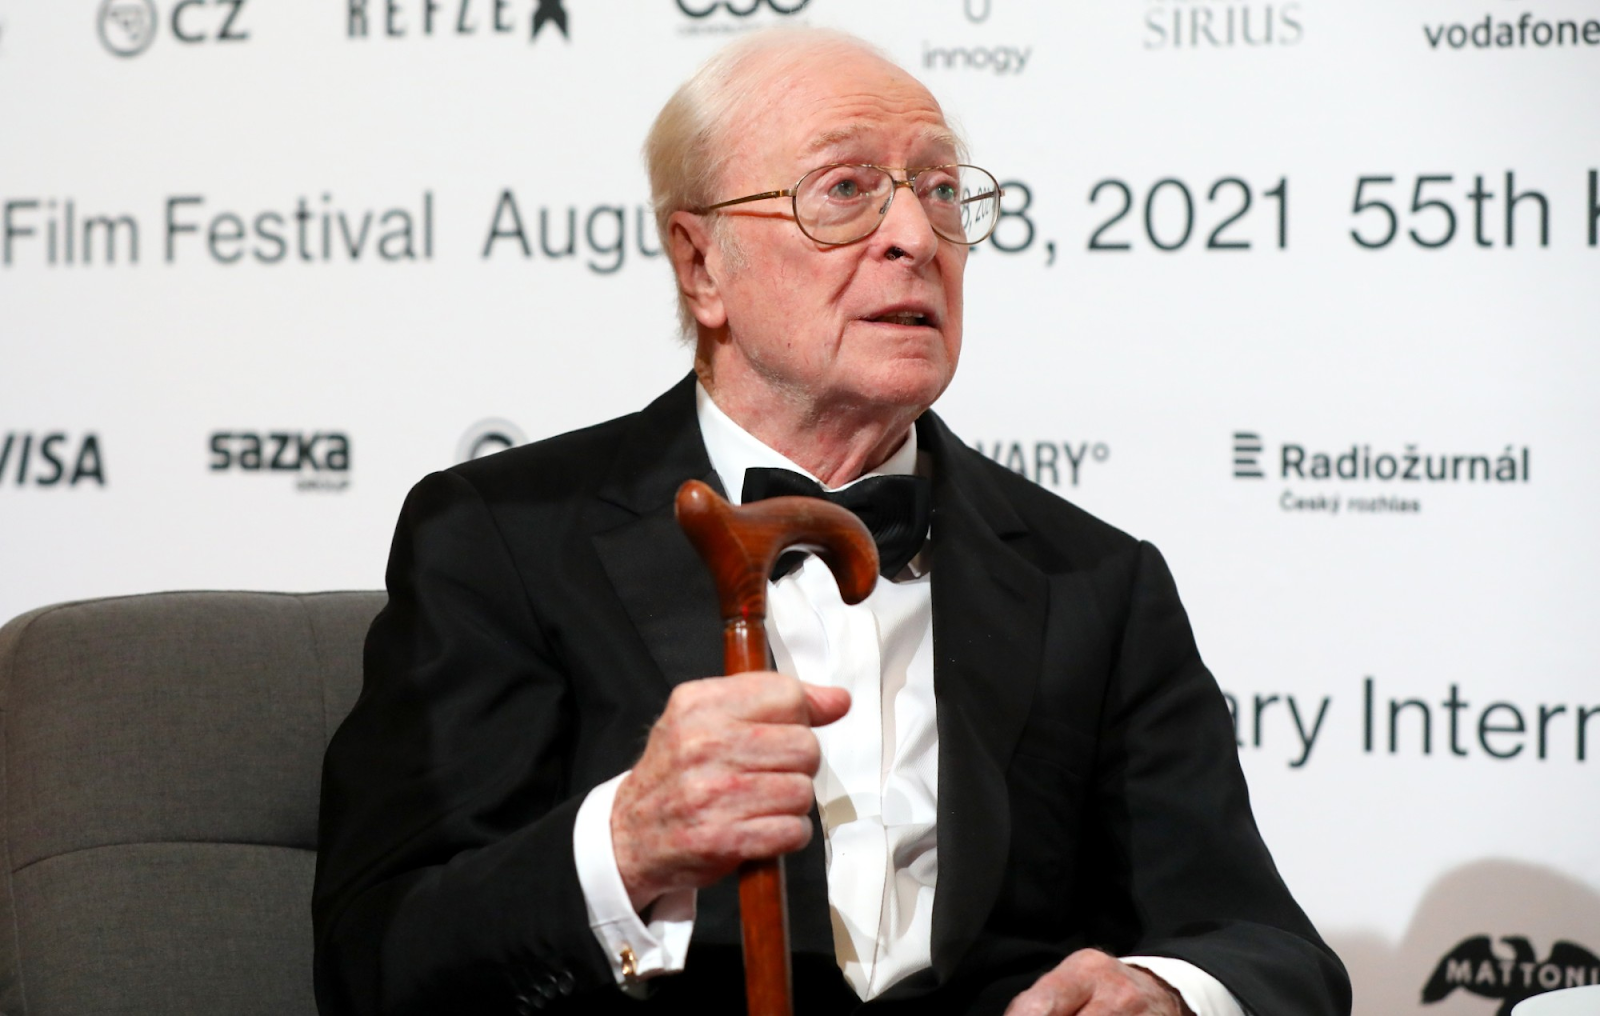 Michael Caine Rumors and Controversies